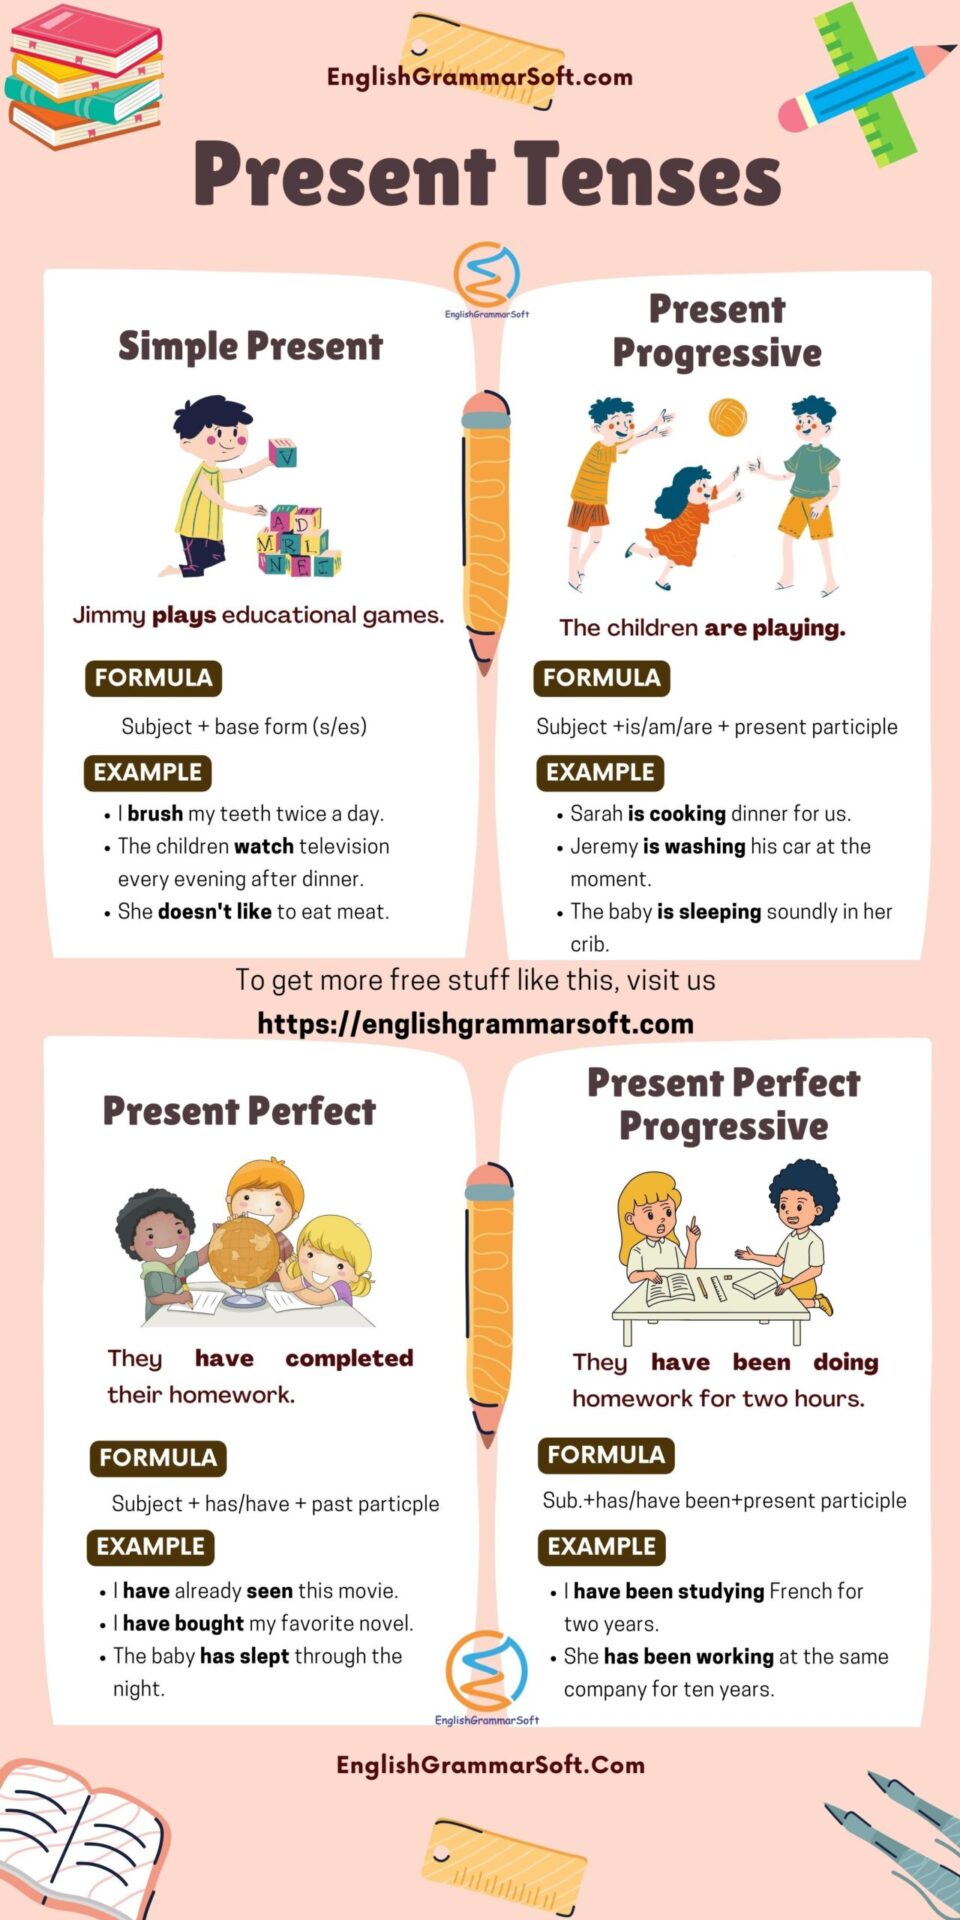 Present Tenses in English (Examples and Structure/Formula)